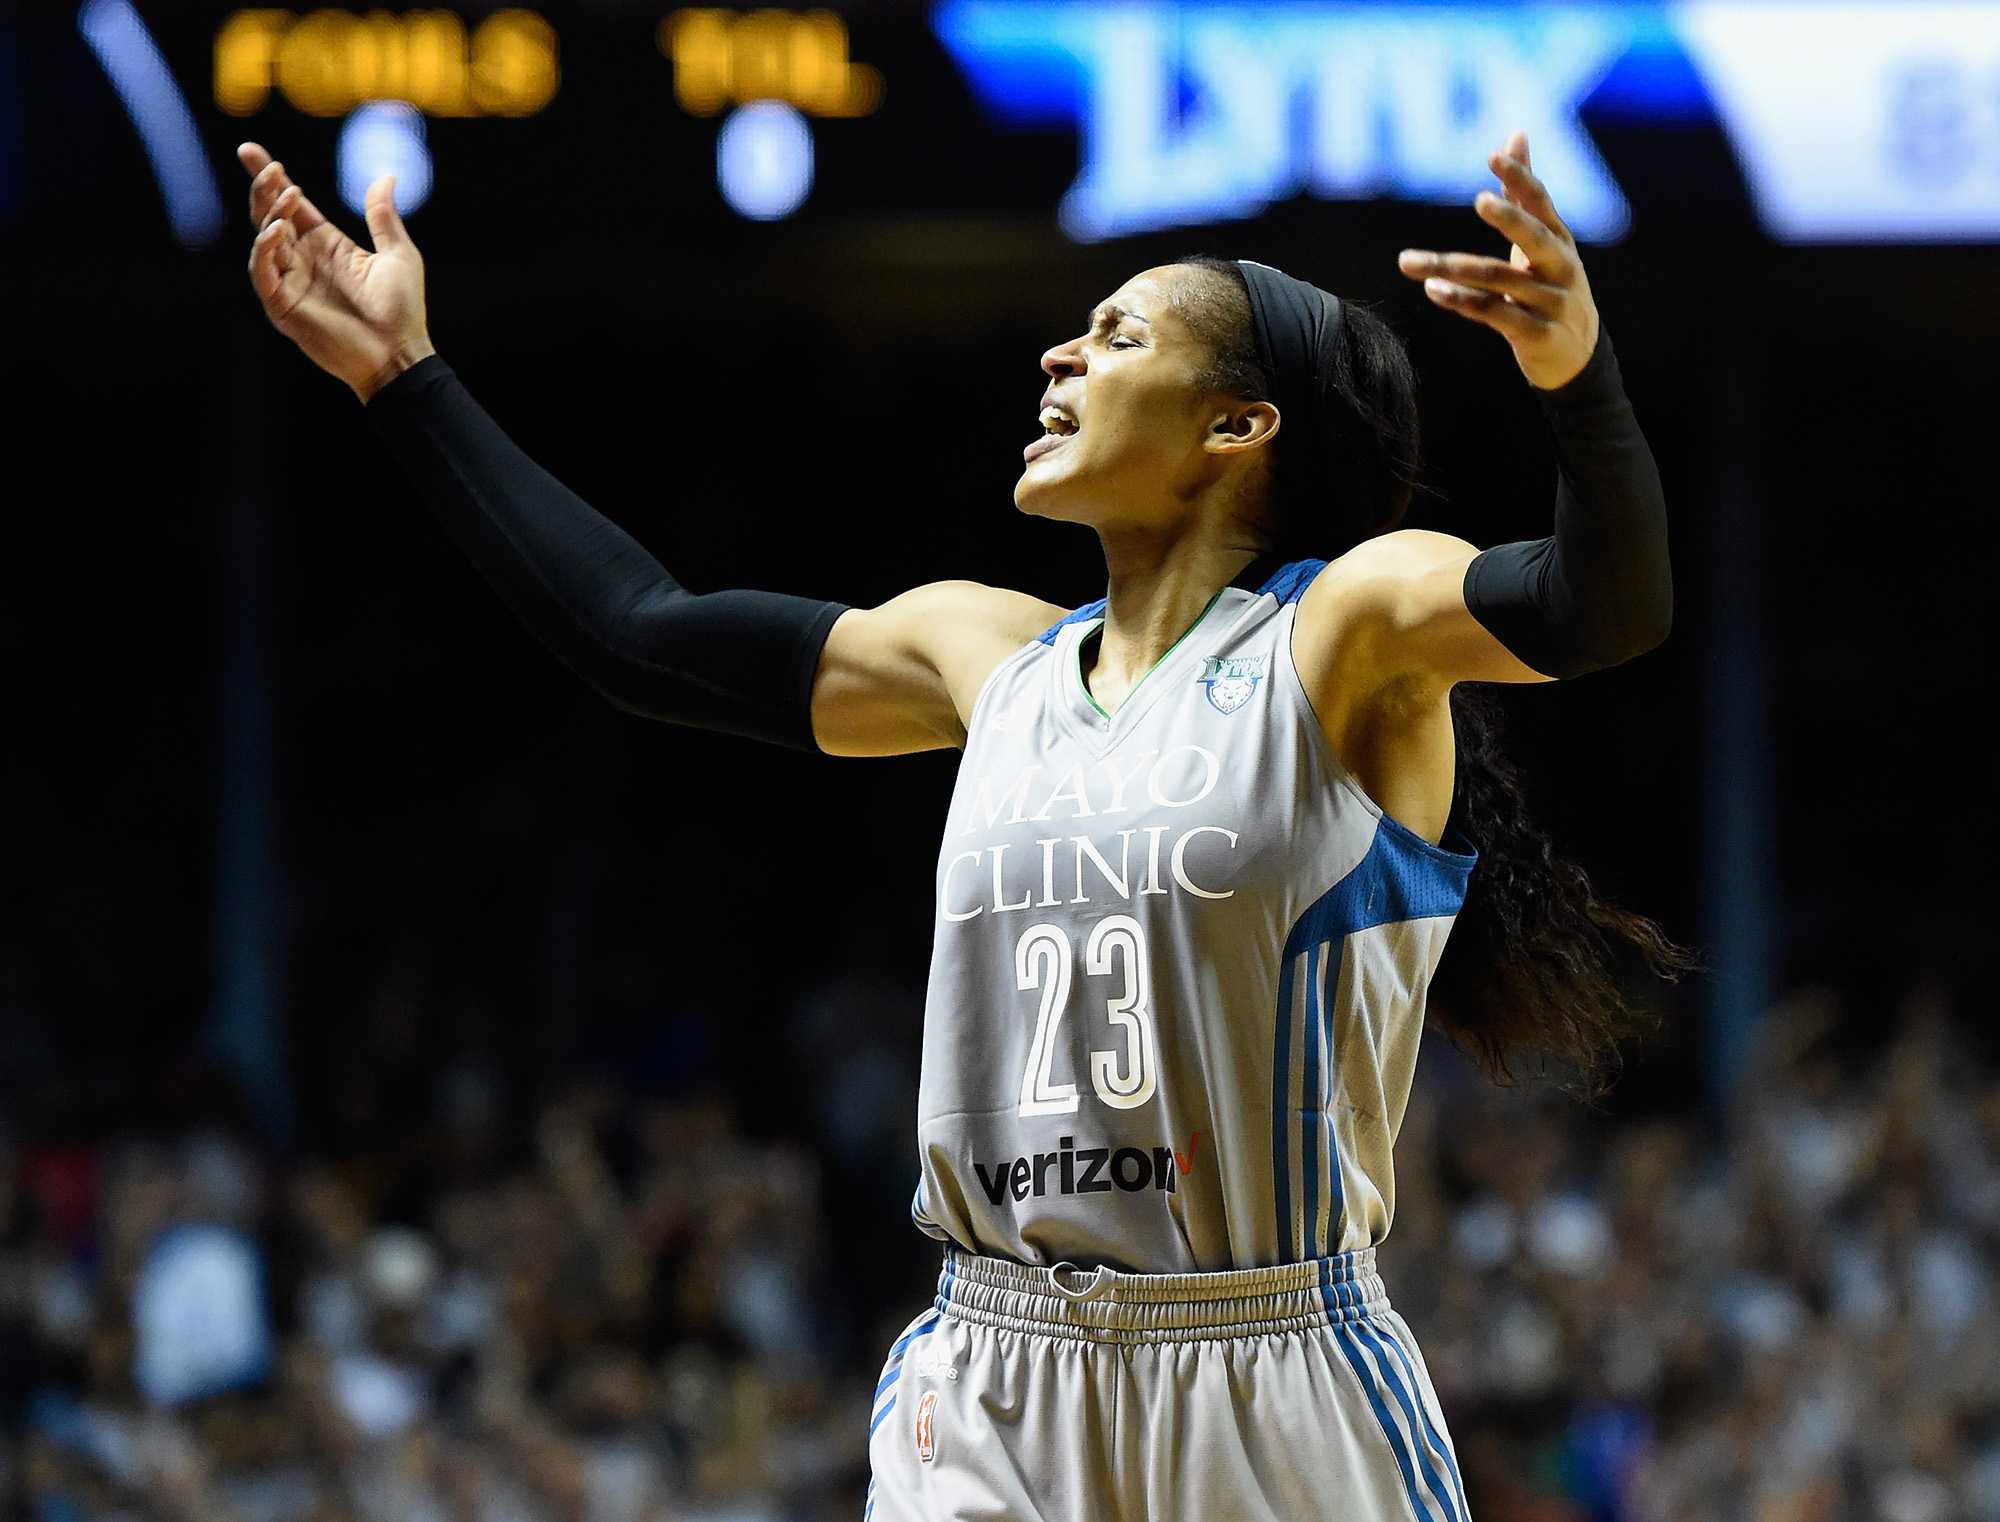 Maya Moore of the Minnesota Lynx pumps up the crowd in the final minute of Game Five of the WNBA Finals against the Los Angeles Sparks on October 4, 2017, in Minneapolis. (Hannah Foslien/Getty Images/TNS)